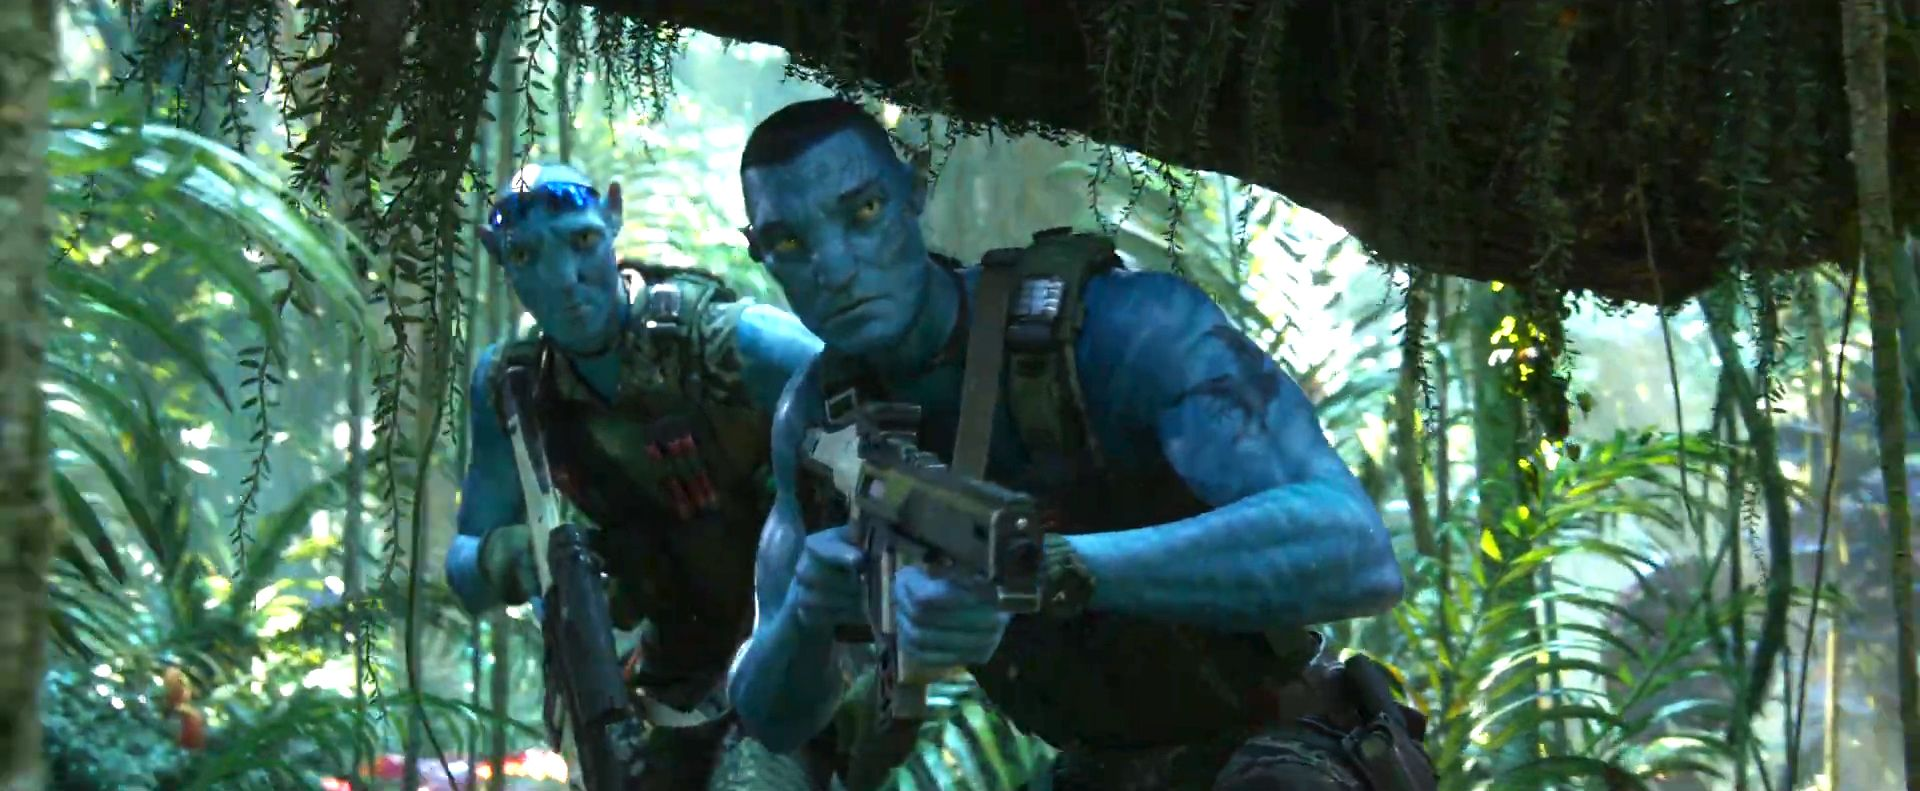 Fans collectively hallucinating Dwayne Johnson’s role in ‘Avatar: The Way of Water’